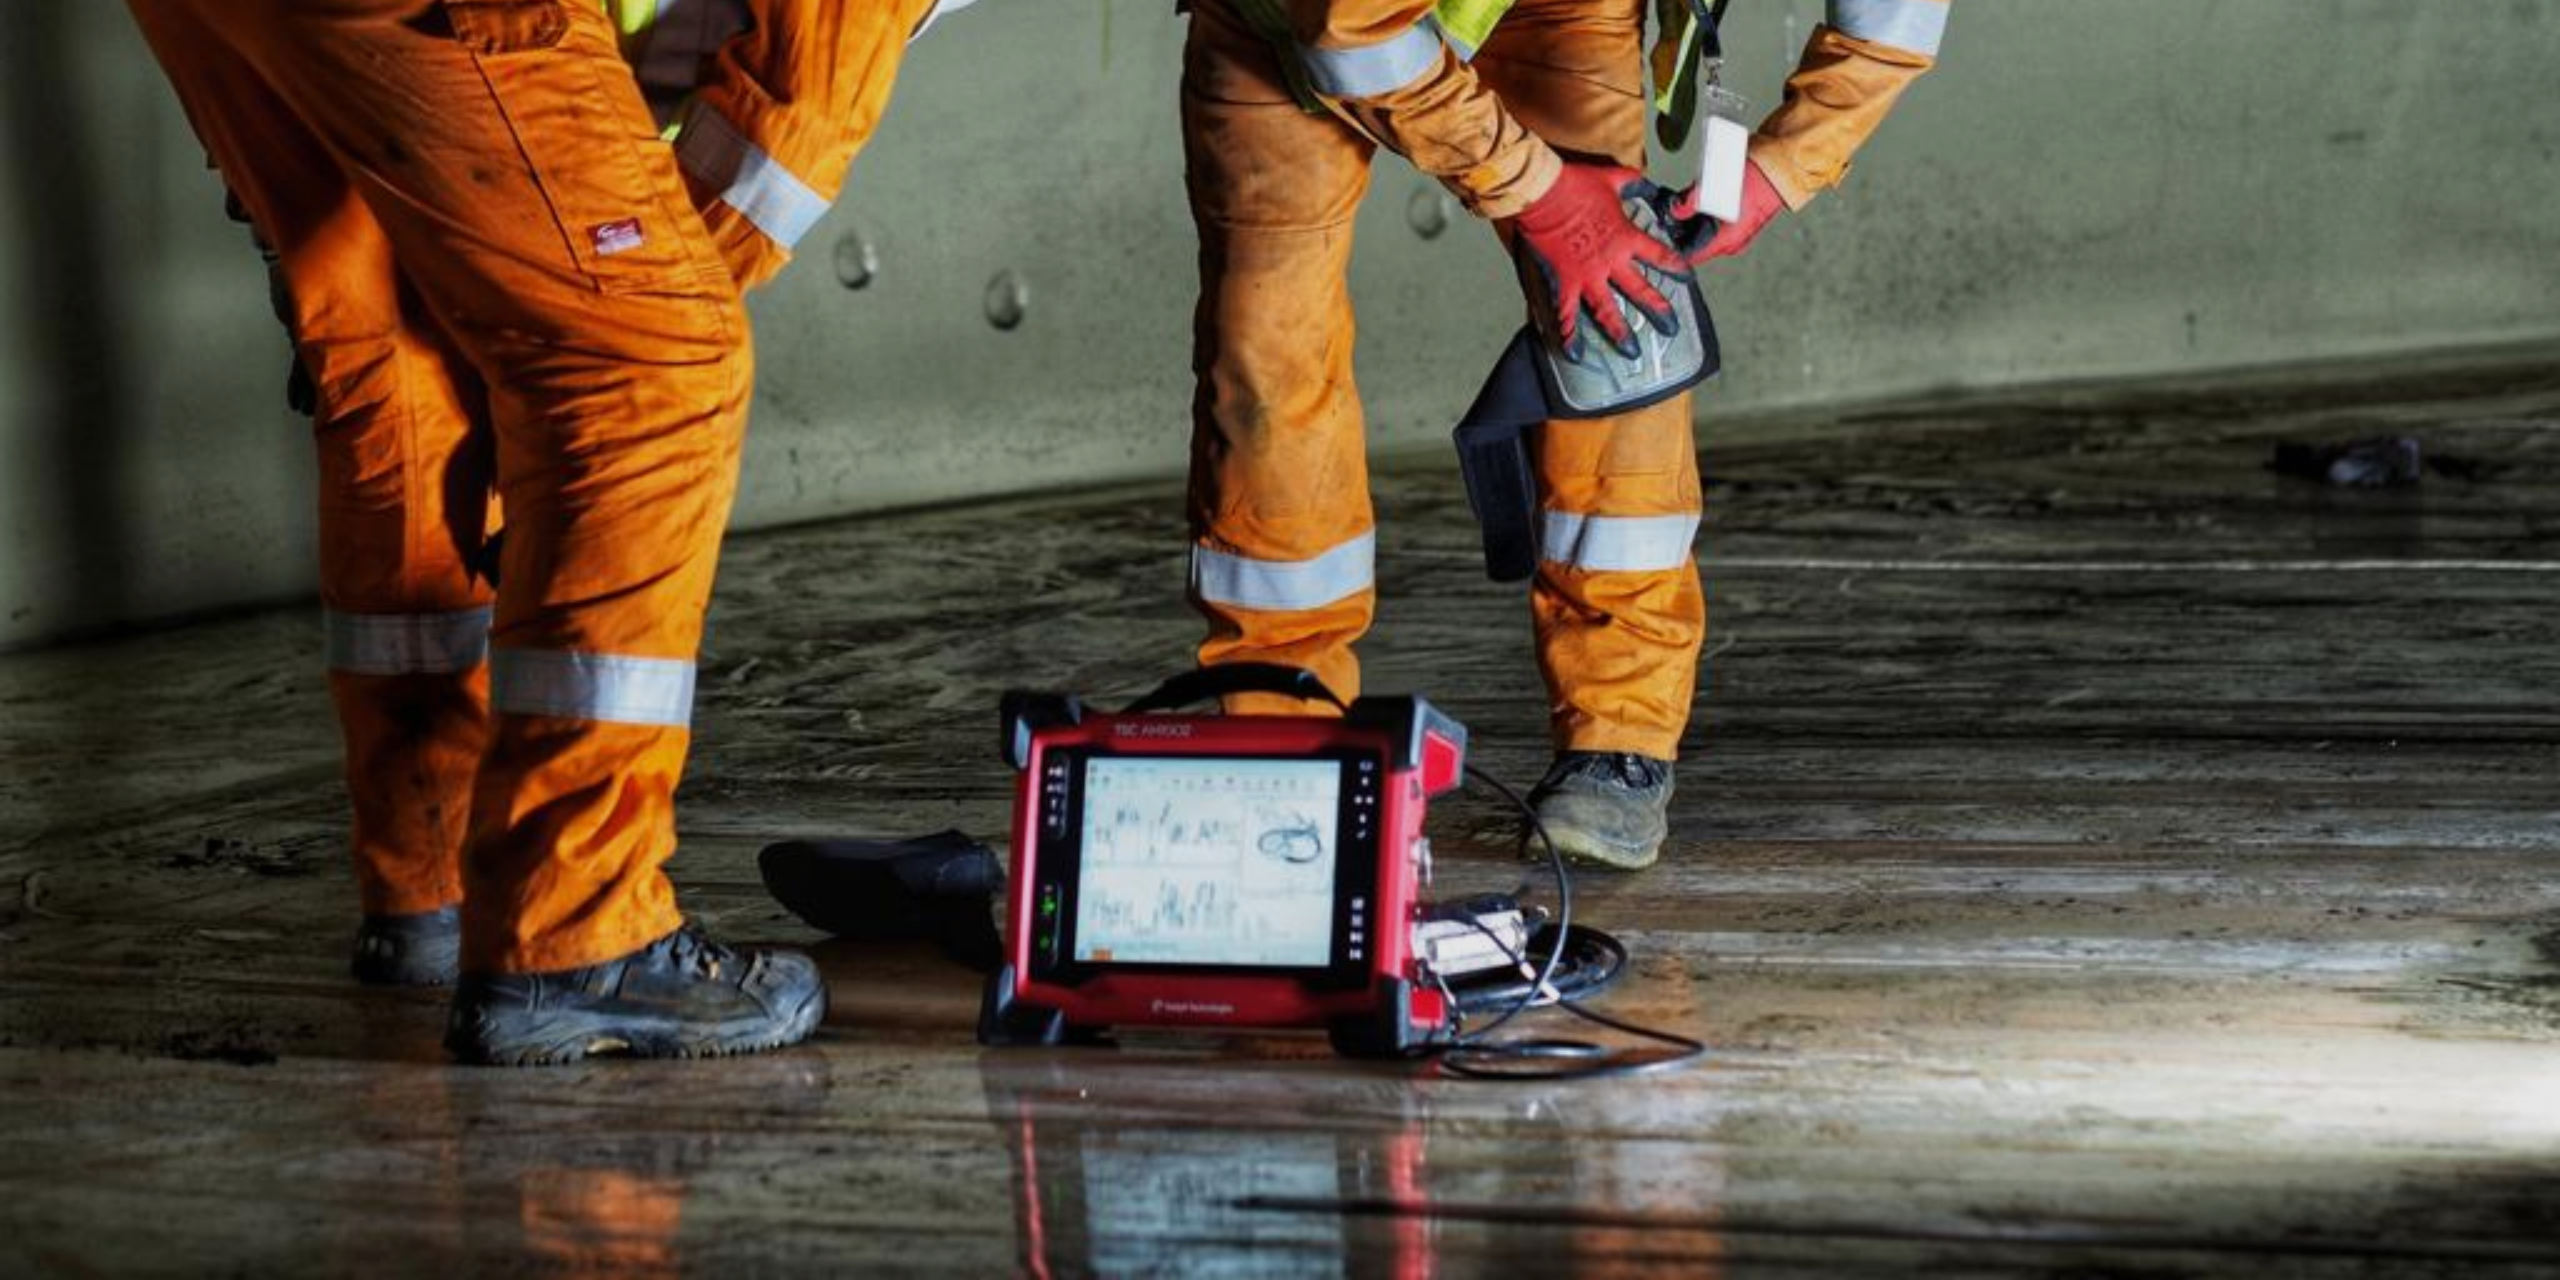 4 Reasons Why the Amigo™ 2 SE for ACFM® Inspection Should Be on Your Radar